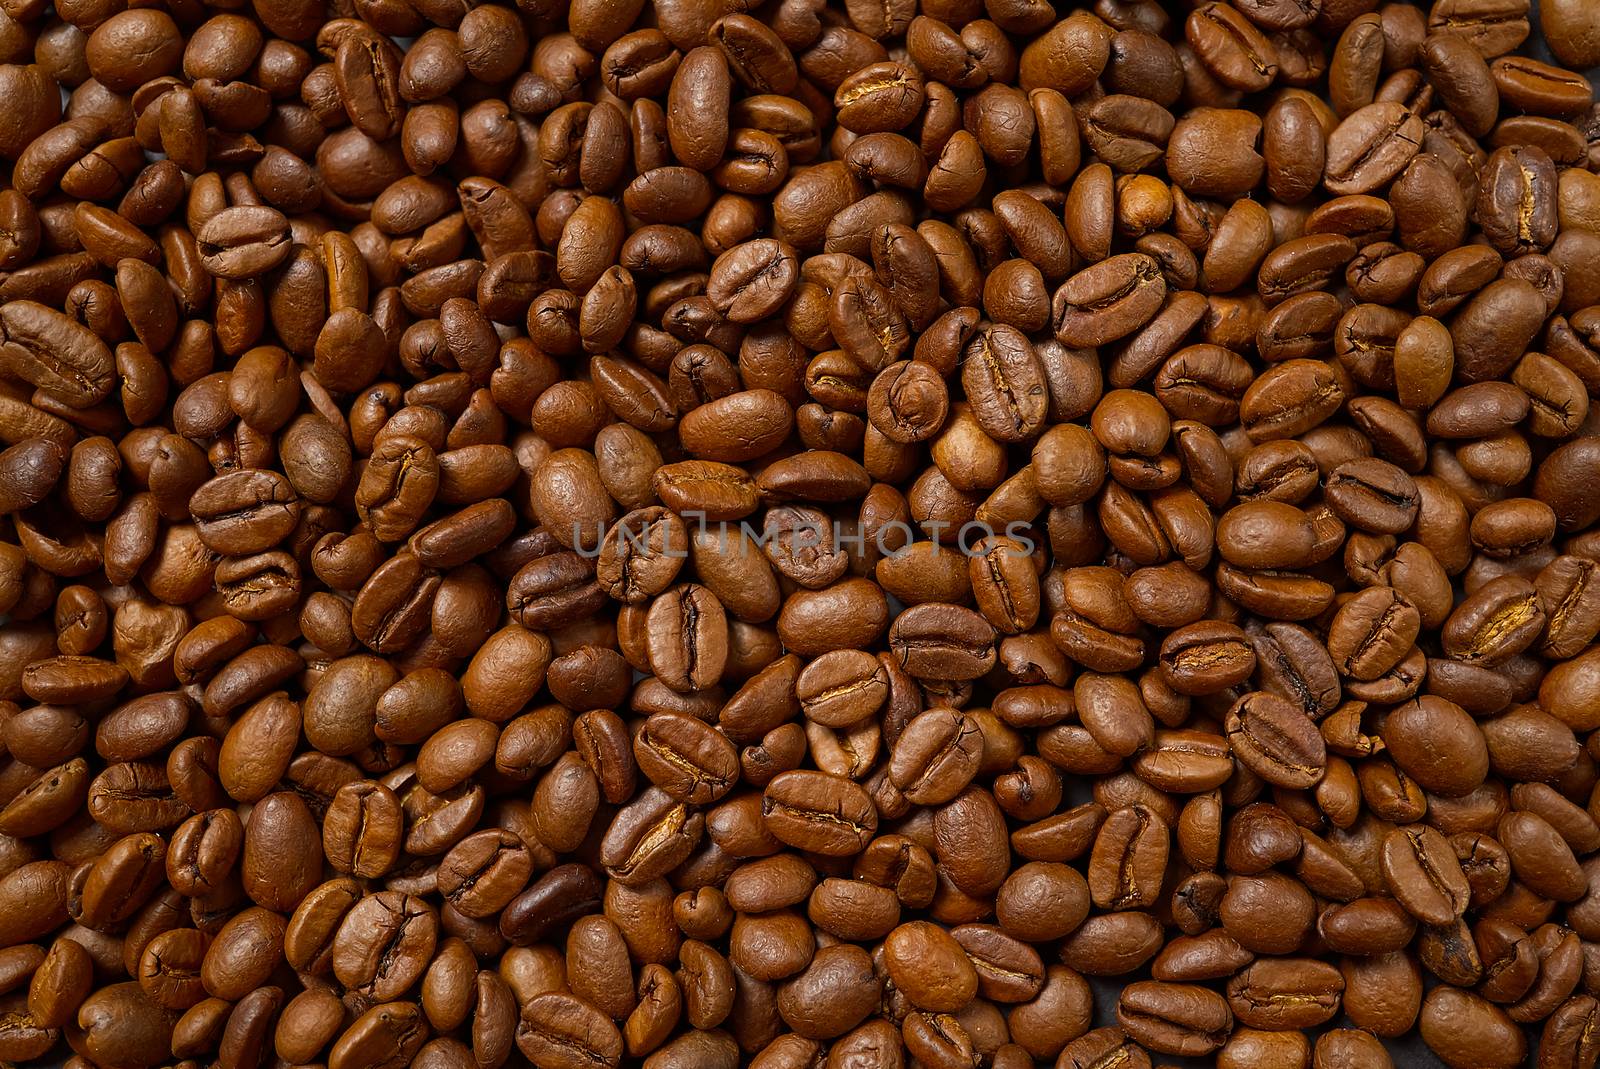 Texture of coffee beans. Roasted coffee beans background. close up Coffee beans by PhotoTime